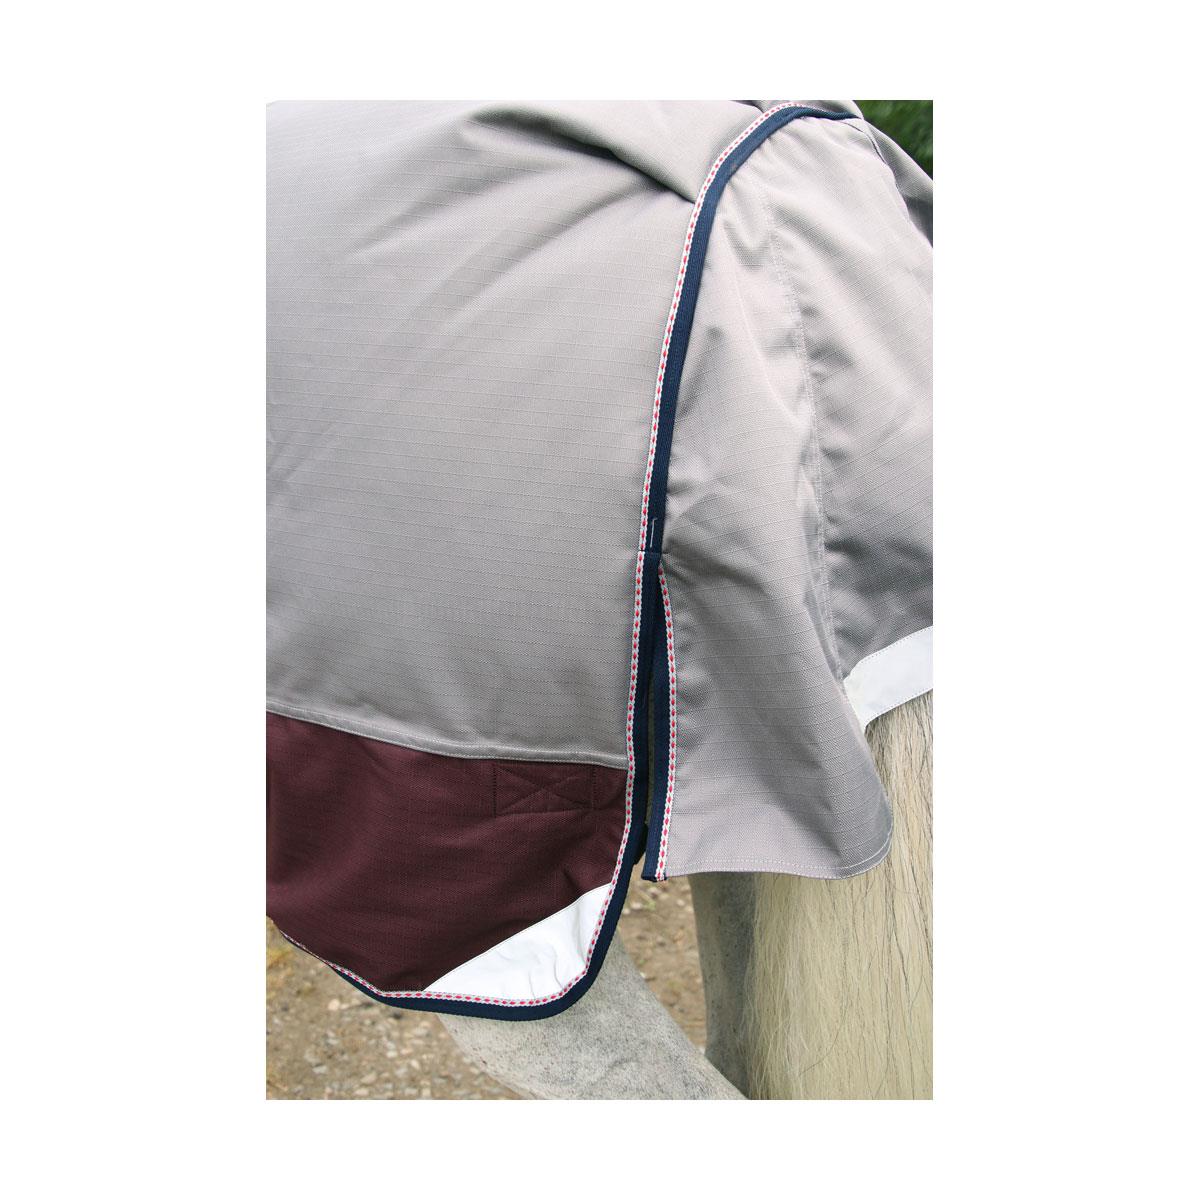 DefenceX System 300 Turnout Rug with Detachable Neck Cover - Just Horse Riders